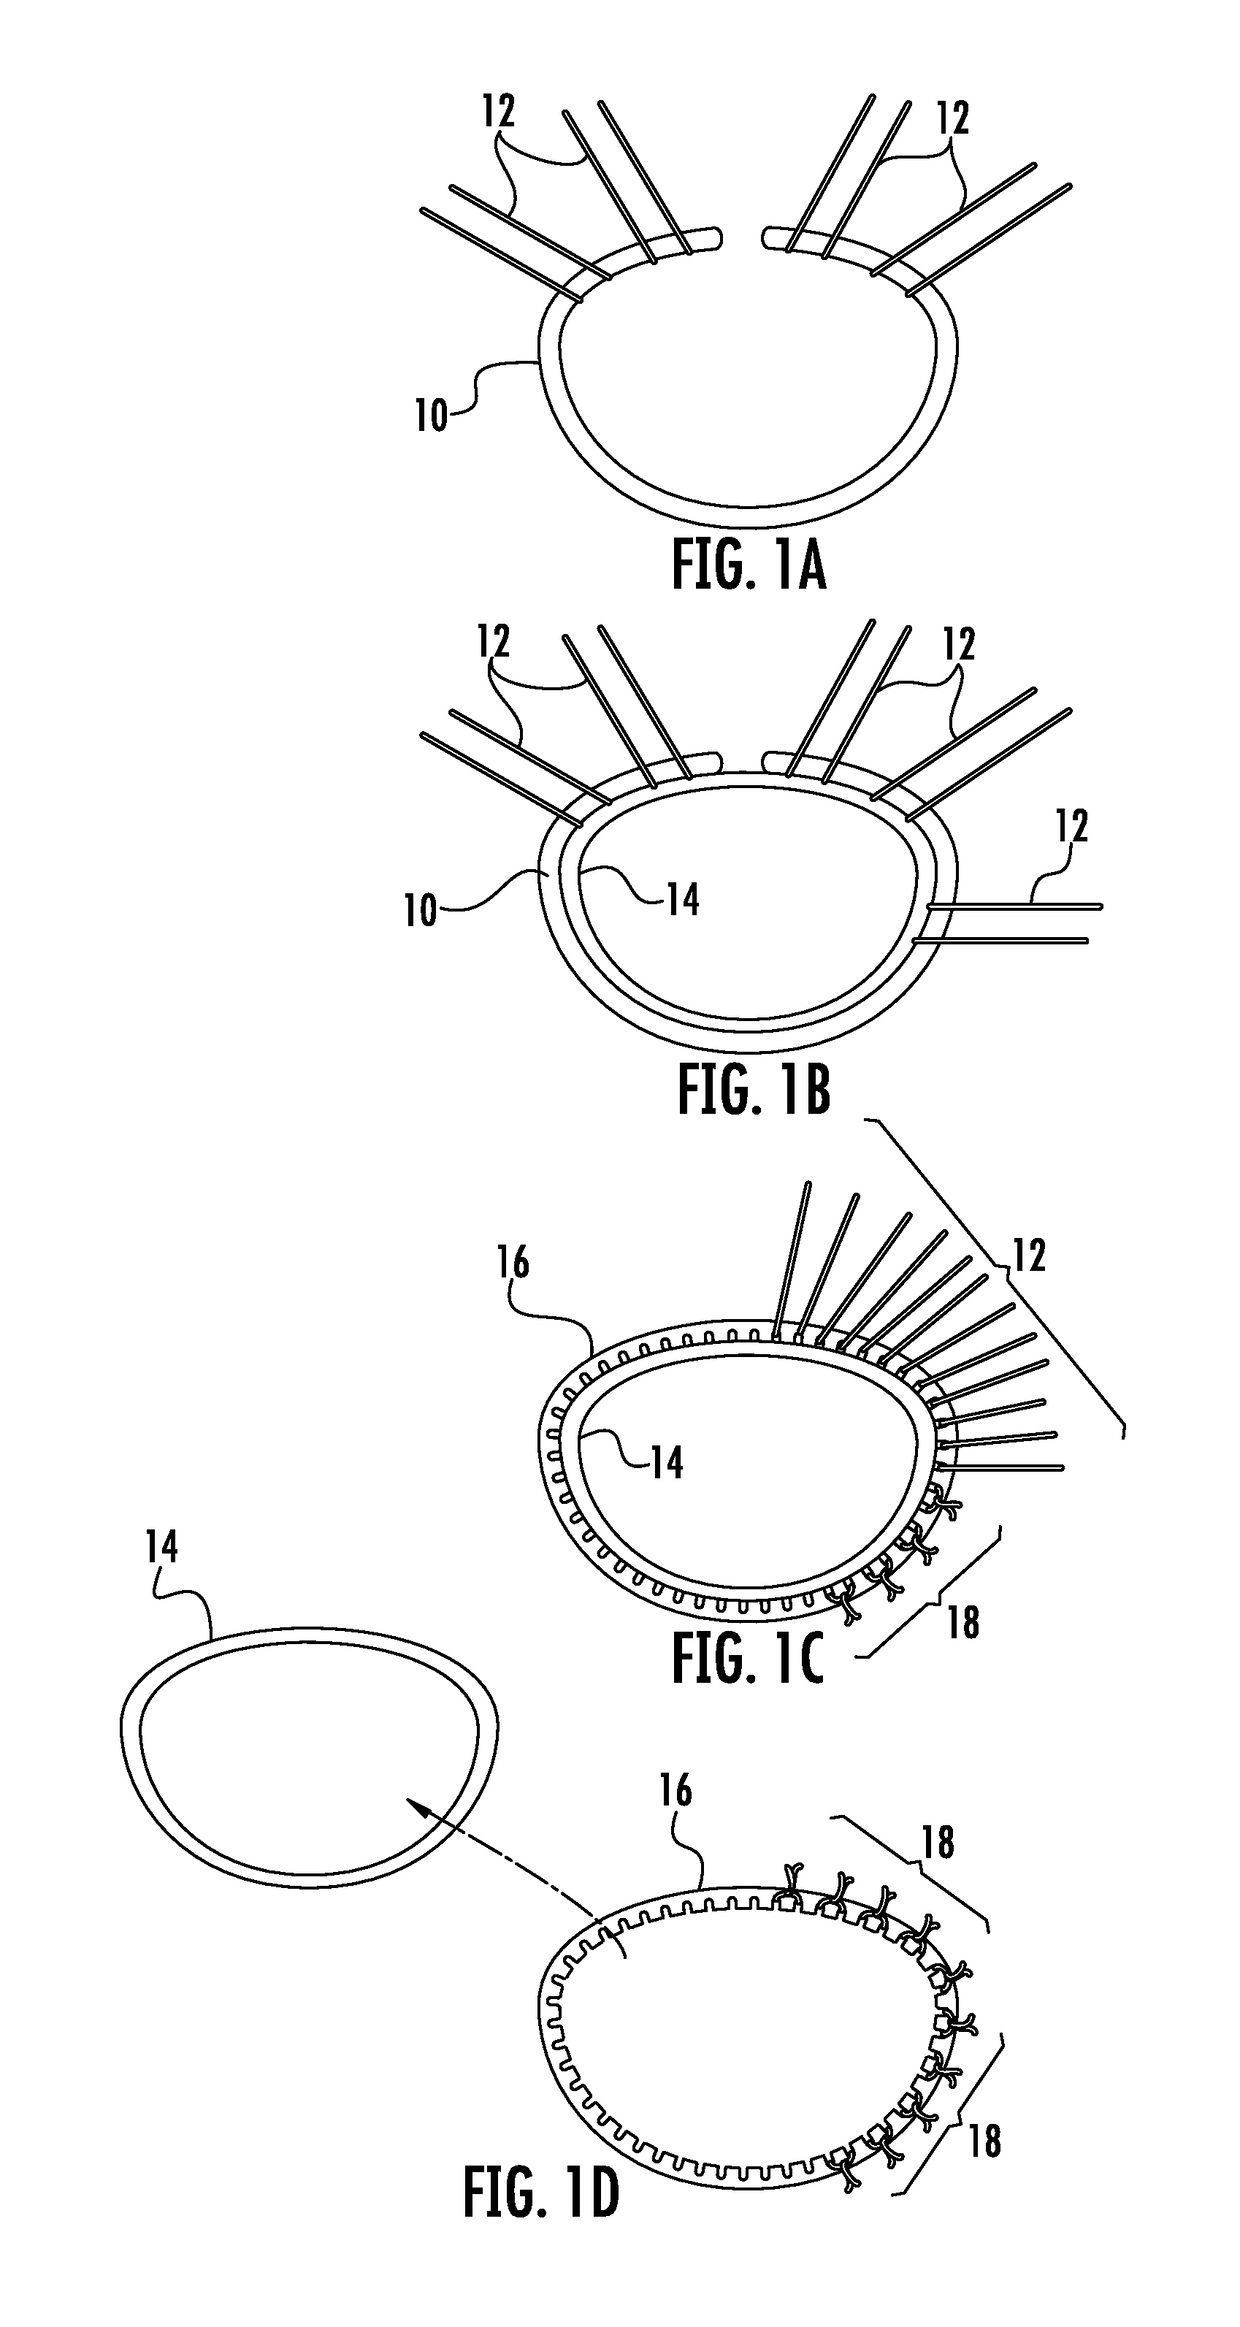 Prosthetic device for heart valve reinforcement and remodeling procedures